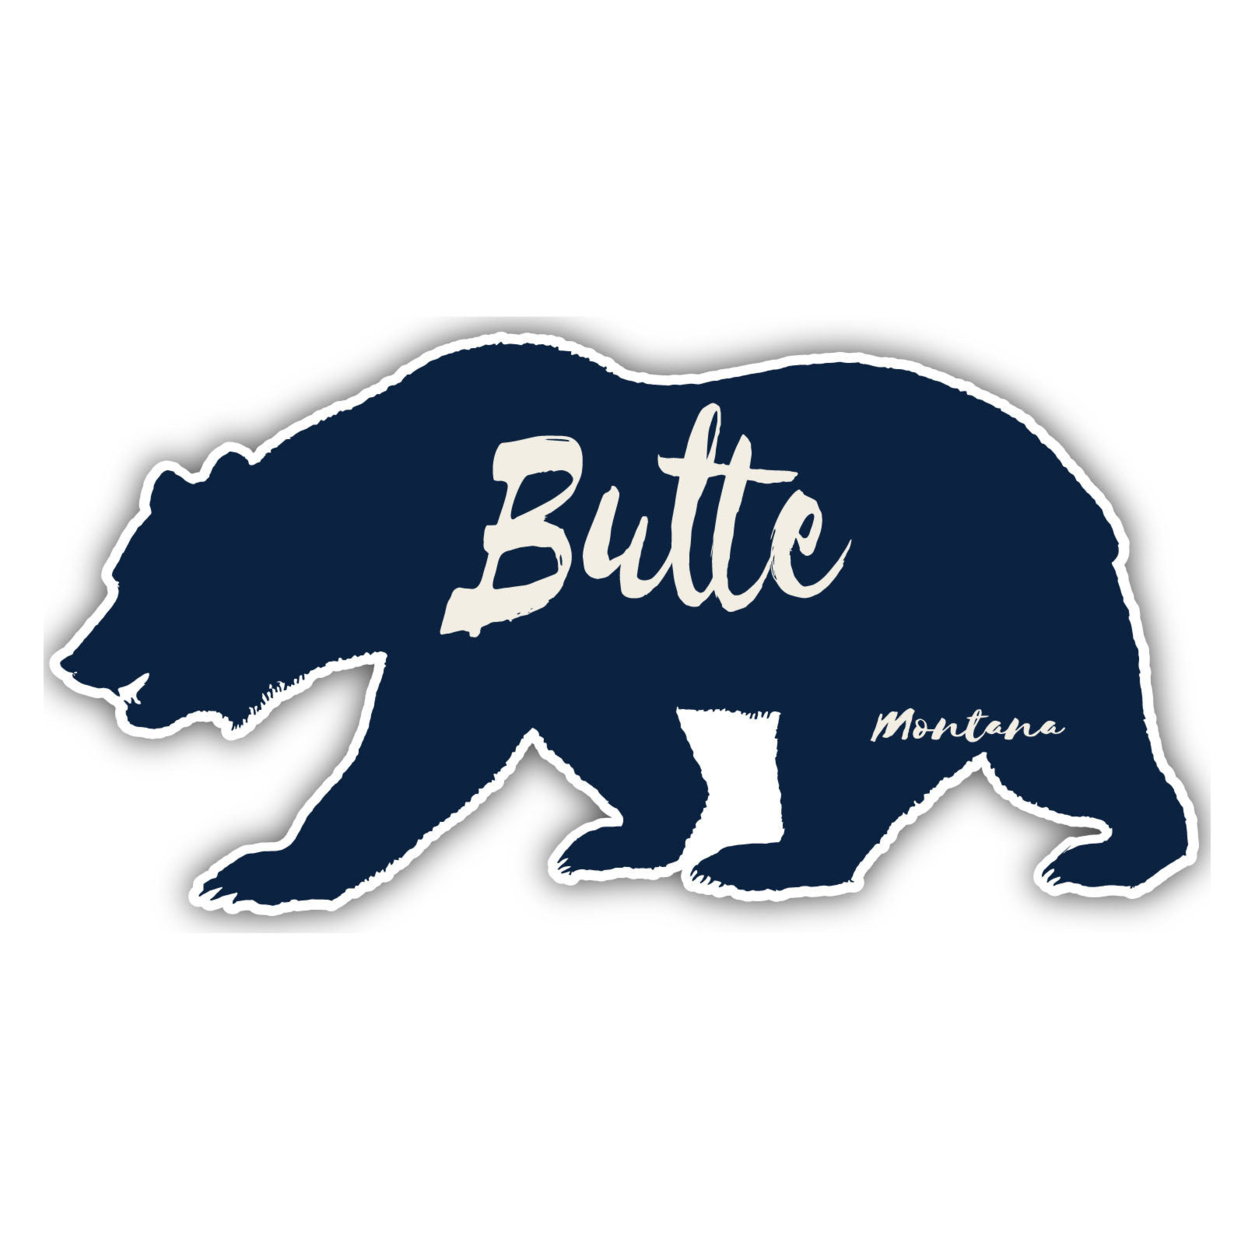 Butte Montana Souvenir Decorative Stickers (Choose Theme And Size) - 4-Pack, 6-Inch, Tent